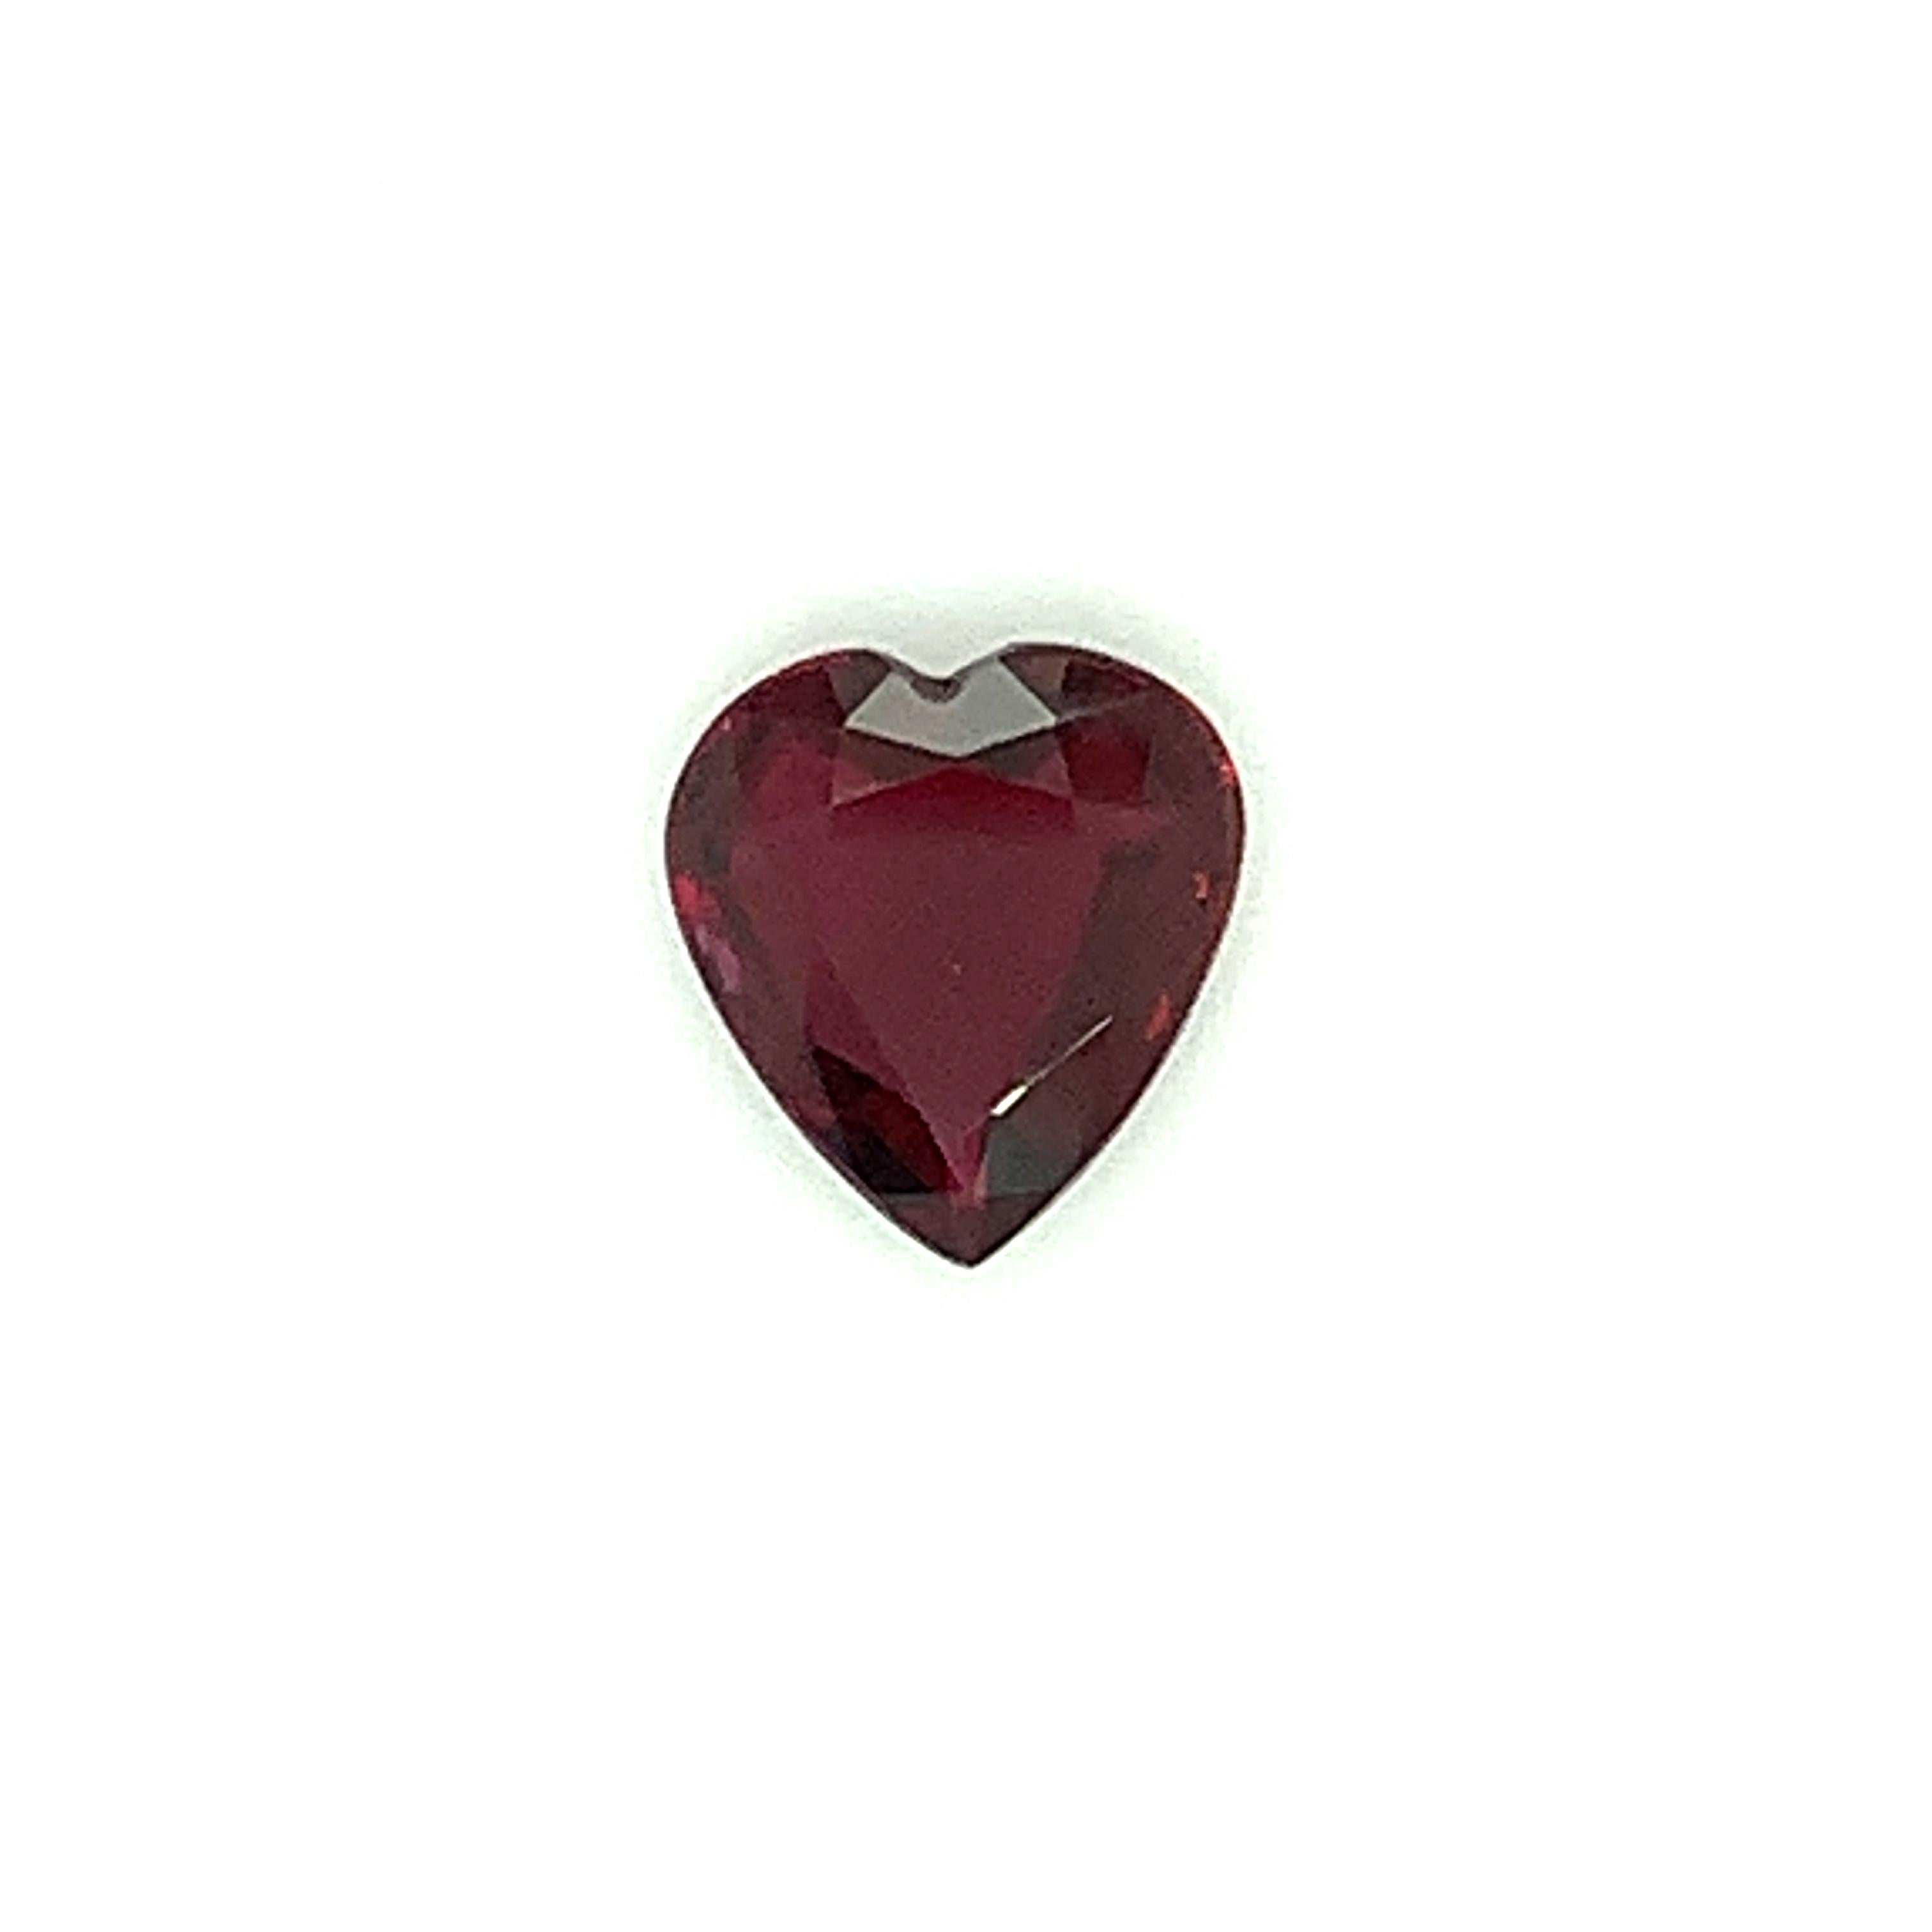 This heart-shaped ruby weighs exactly 2.00 carats and has beautifully rich, saturated color! It measures 9.31 x 8.66 x 2.92 millimeters and would be stunning set as a ring or pendant with a halo of sparkling diamonds. This gem has no secondary